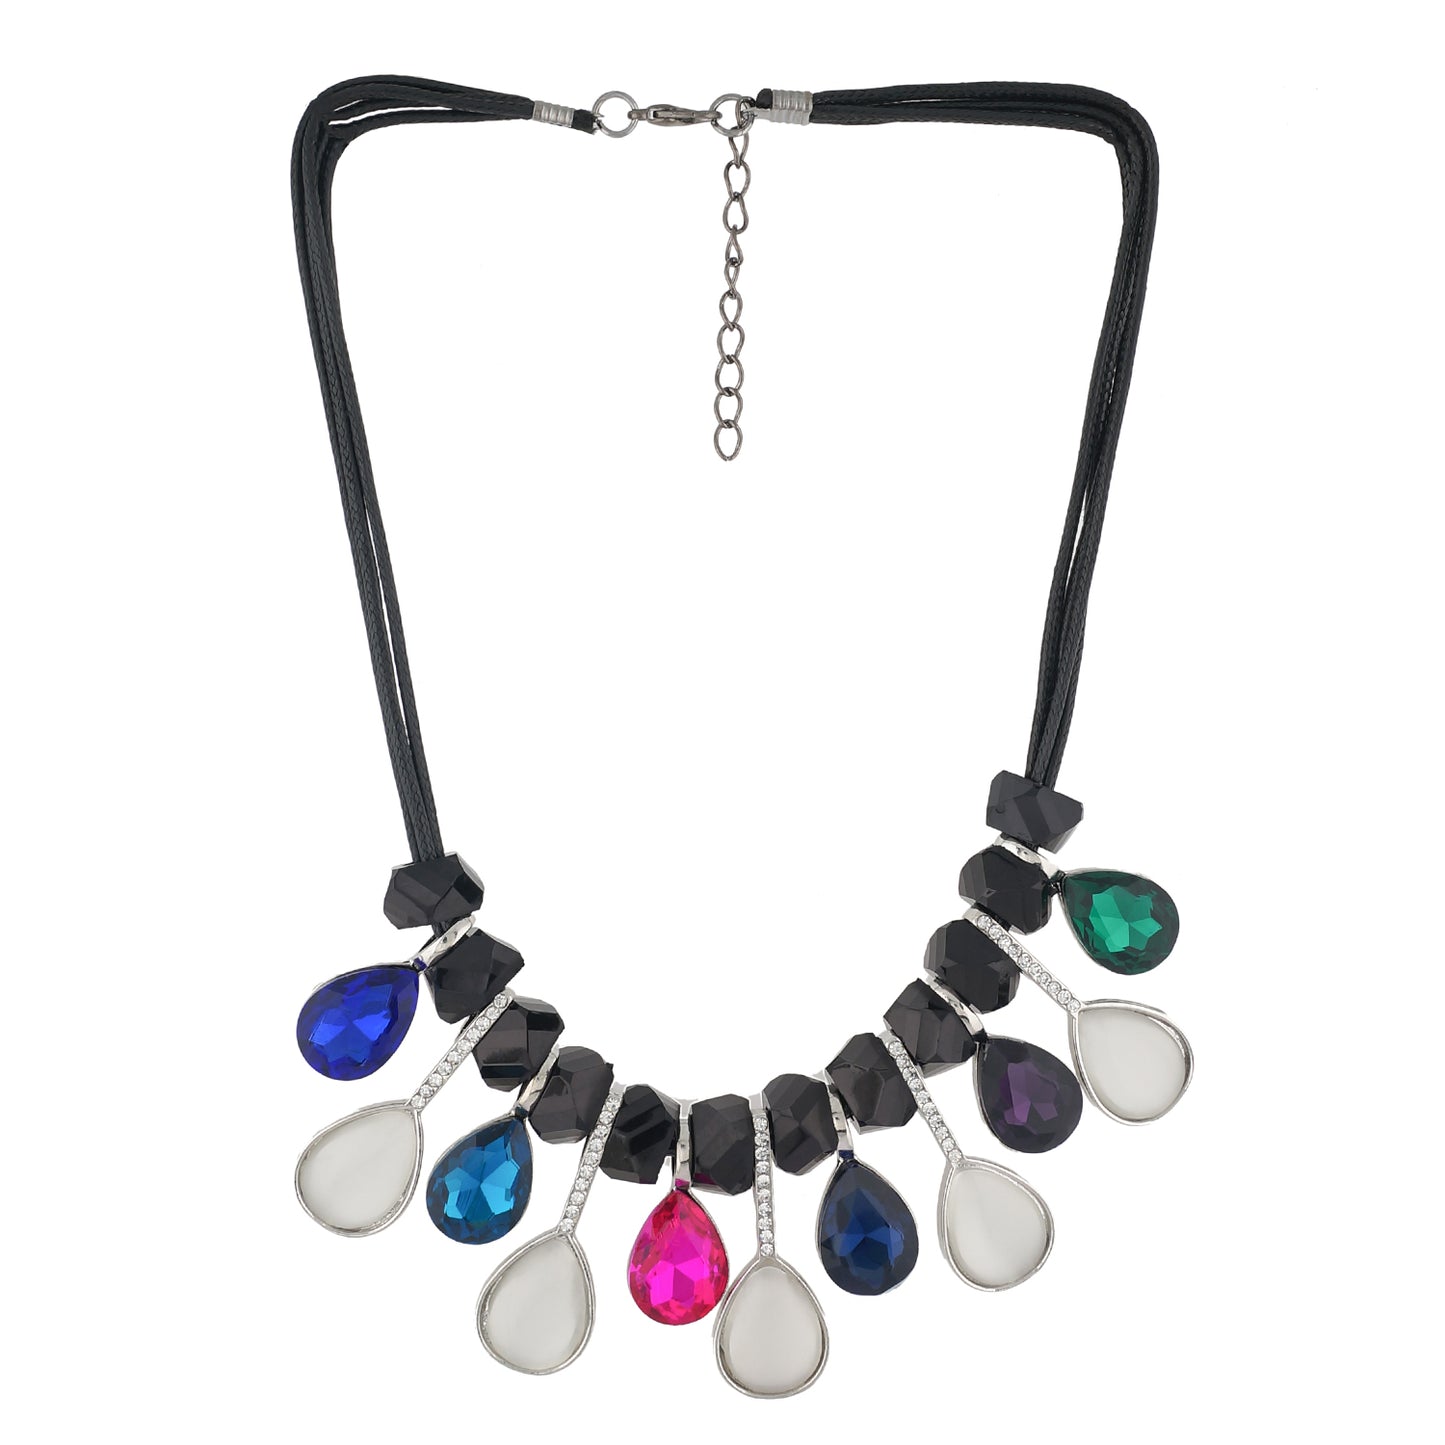 Colour Drop Design Necklace for Girls and Womens